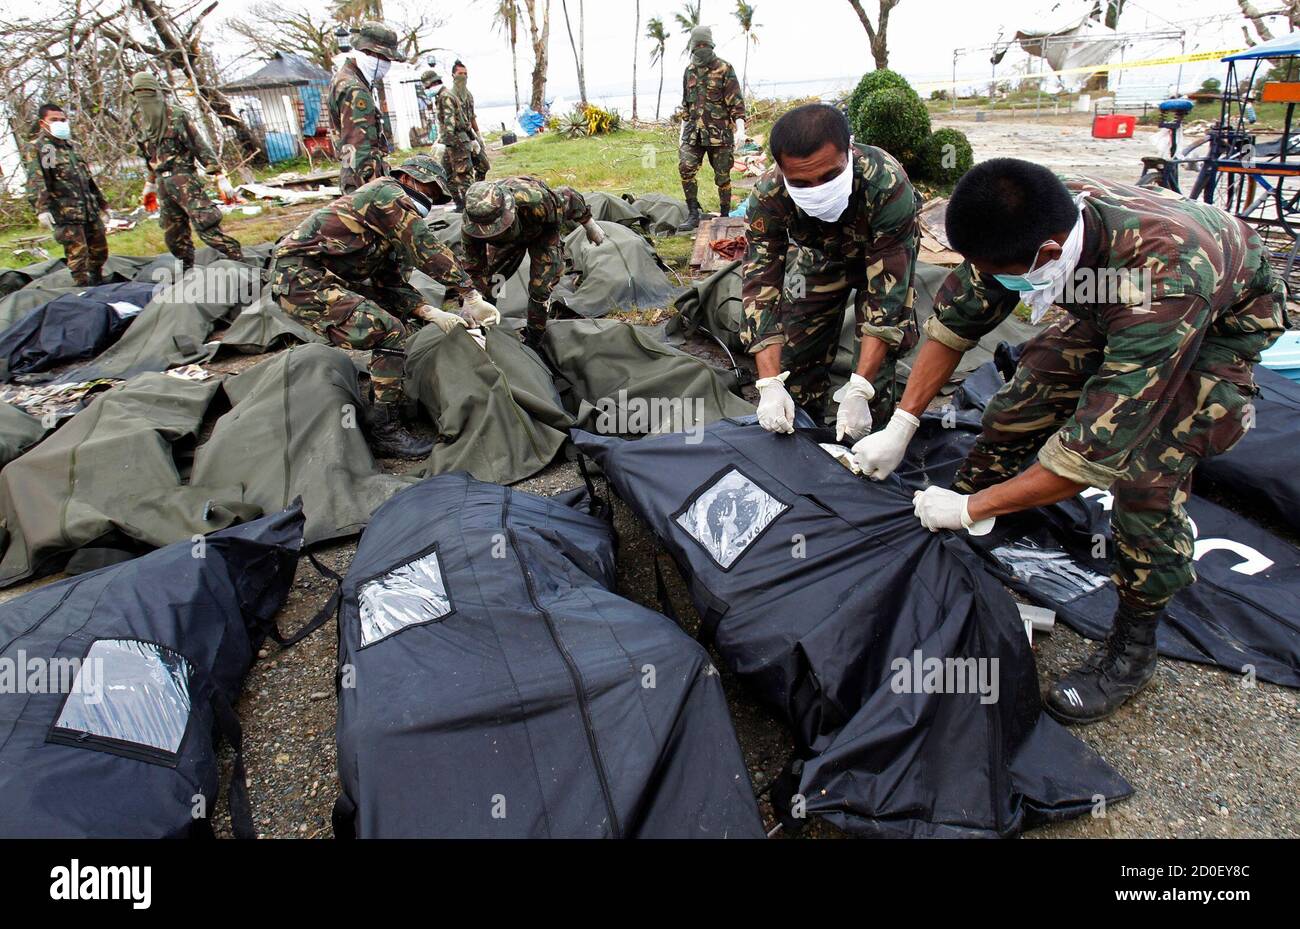 Soldiers zip up body bags after families have identified their relatives who perished during super typhoon Haiyan in Tacloban city, central Philippines November 13, 2013. The government has been overwhelmed by the force of the typhoon, which decimated large swathes of Leyte province where local officials have said they feared 10,000 people died, many drowning in a tsunami-like surge of seawater. REUTERS/Edgar Su (PHILIPPINES - Tags: DISASTER ENVIRONMENT) Stock Photo